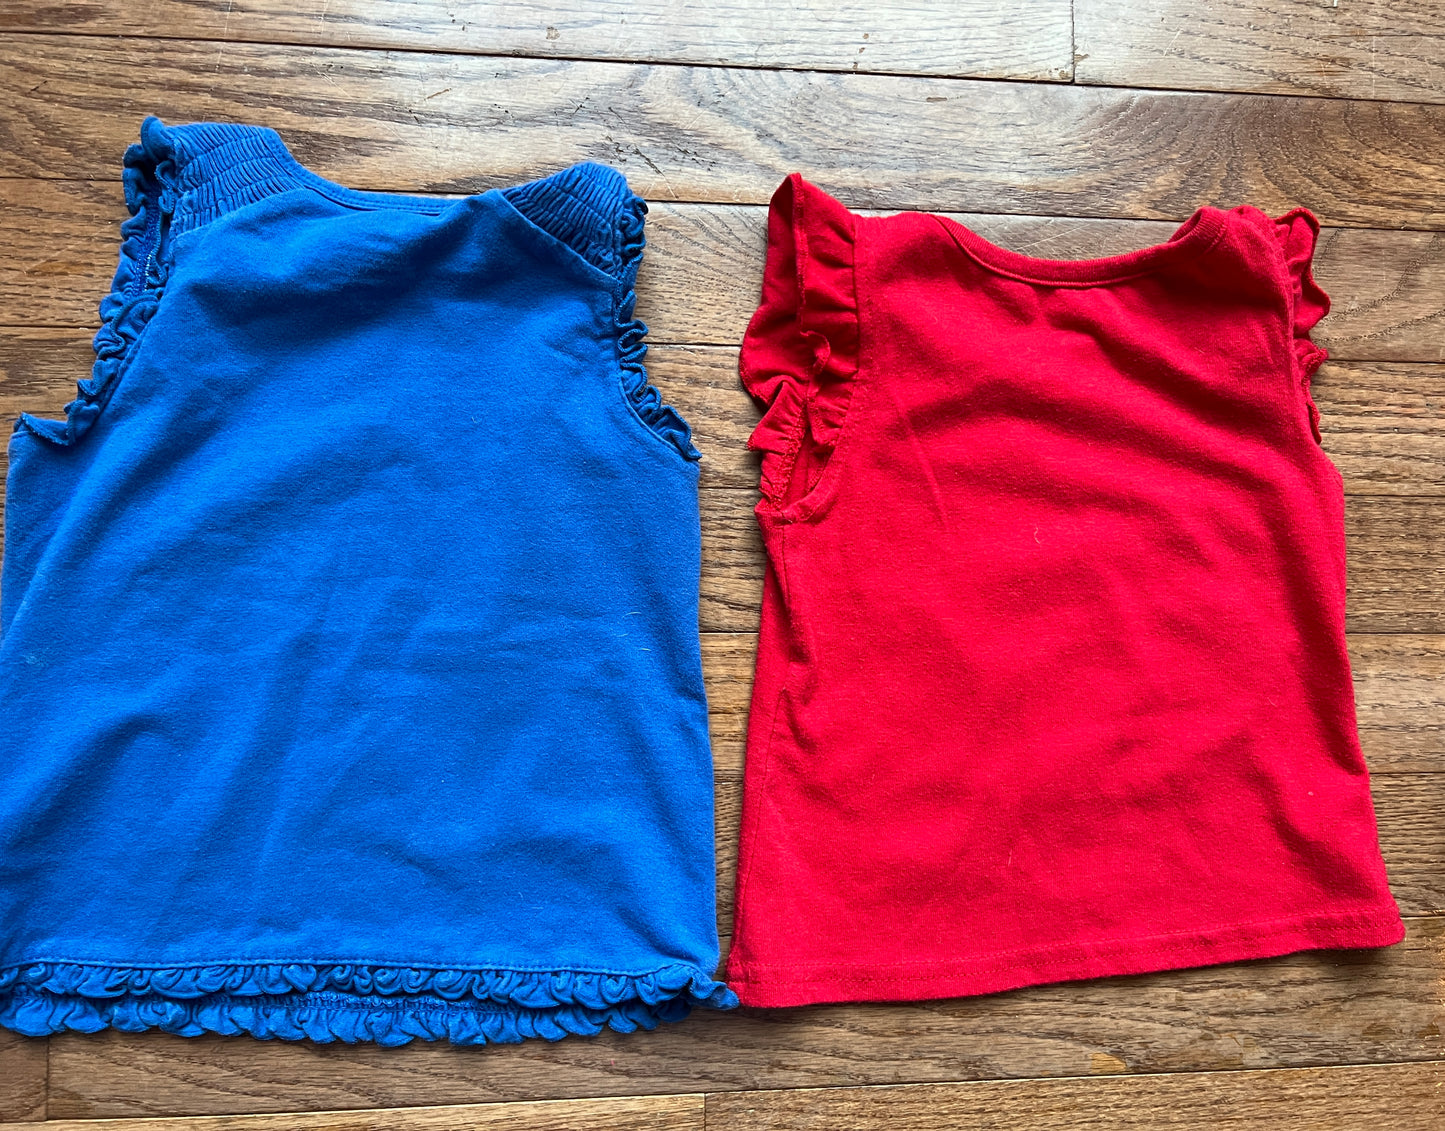 Girls Lot of 24M Set of 2 shirts (Disney Minnie/Blue) and Children's Place Teal Skort PPU Anderson